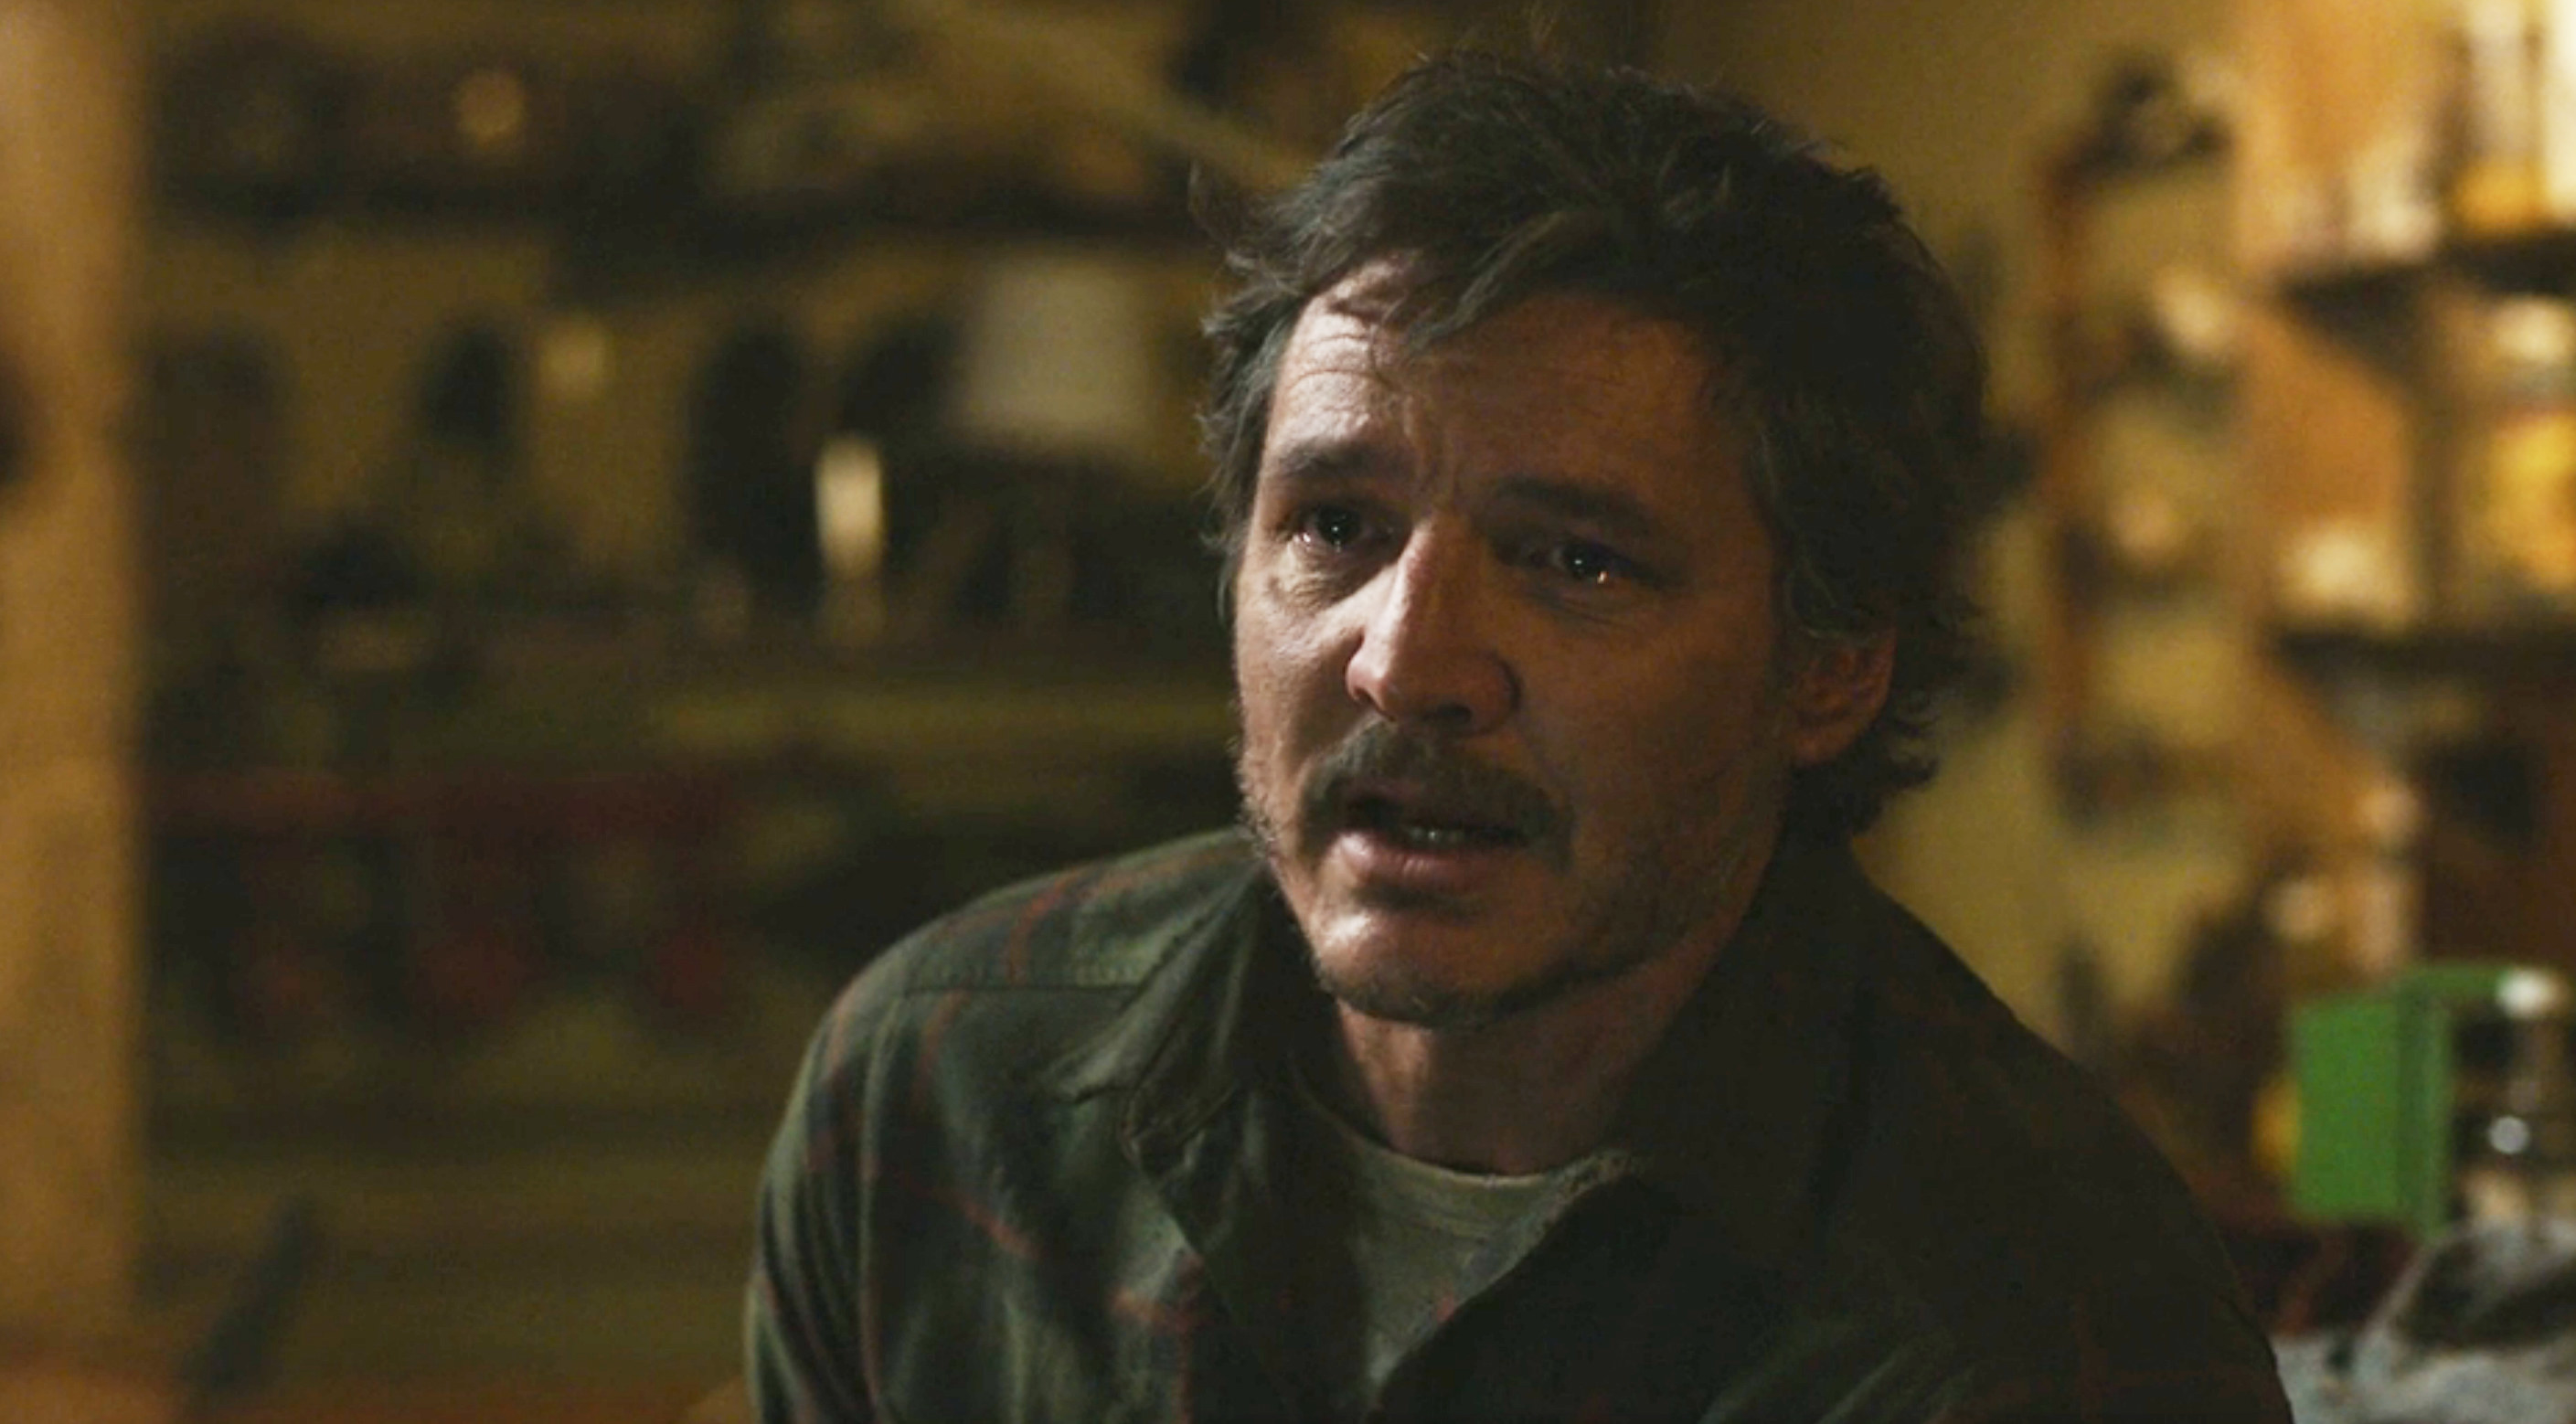 The Last of Us' HBO set photos show off Pedro Pascal as Joel